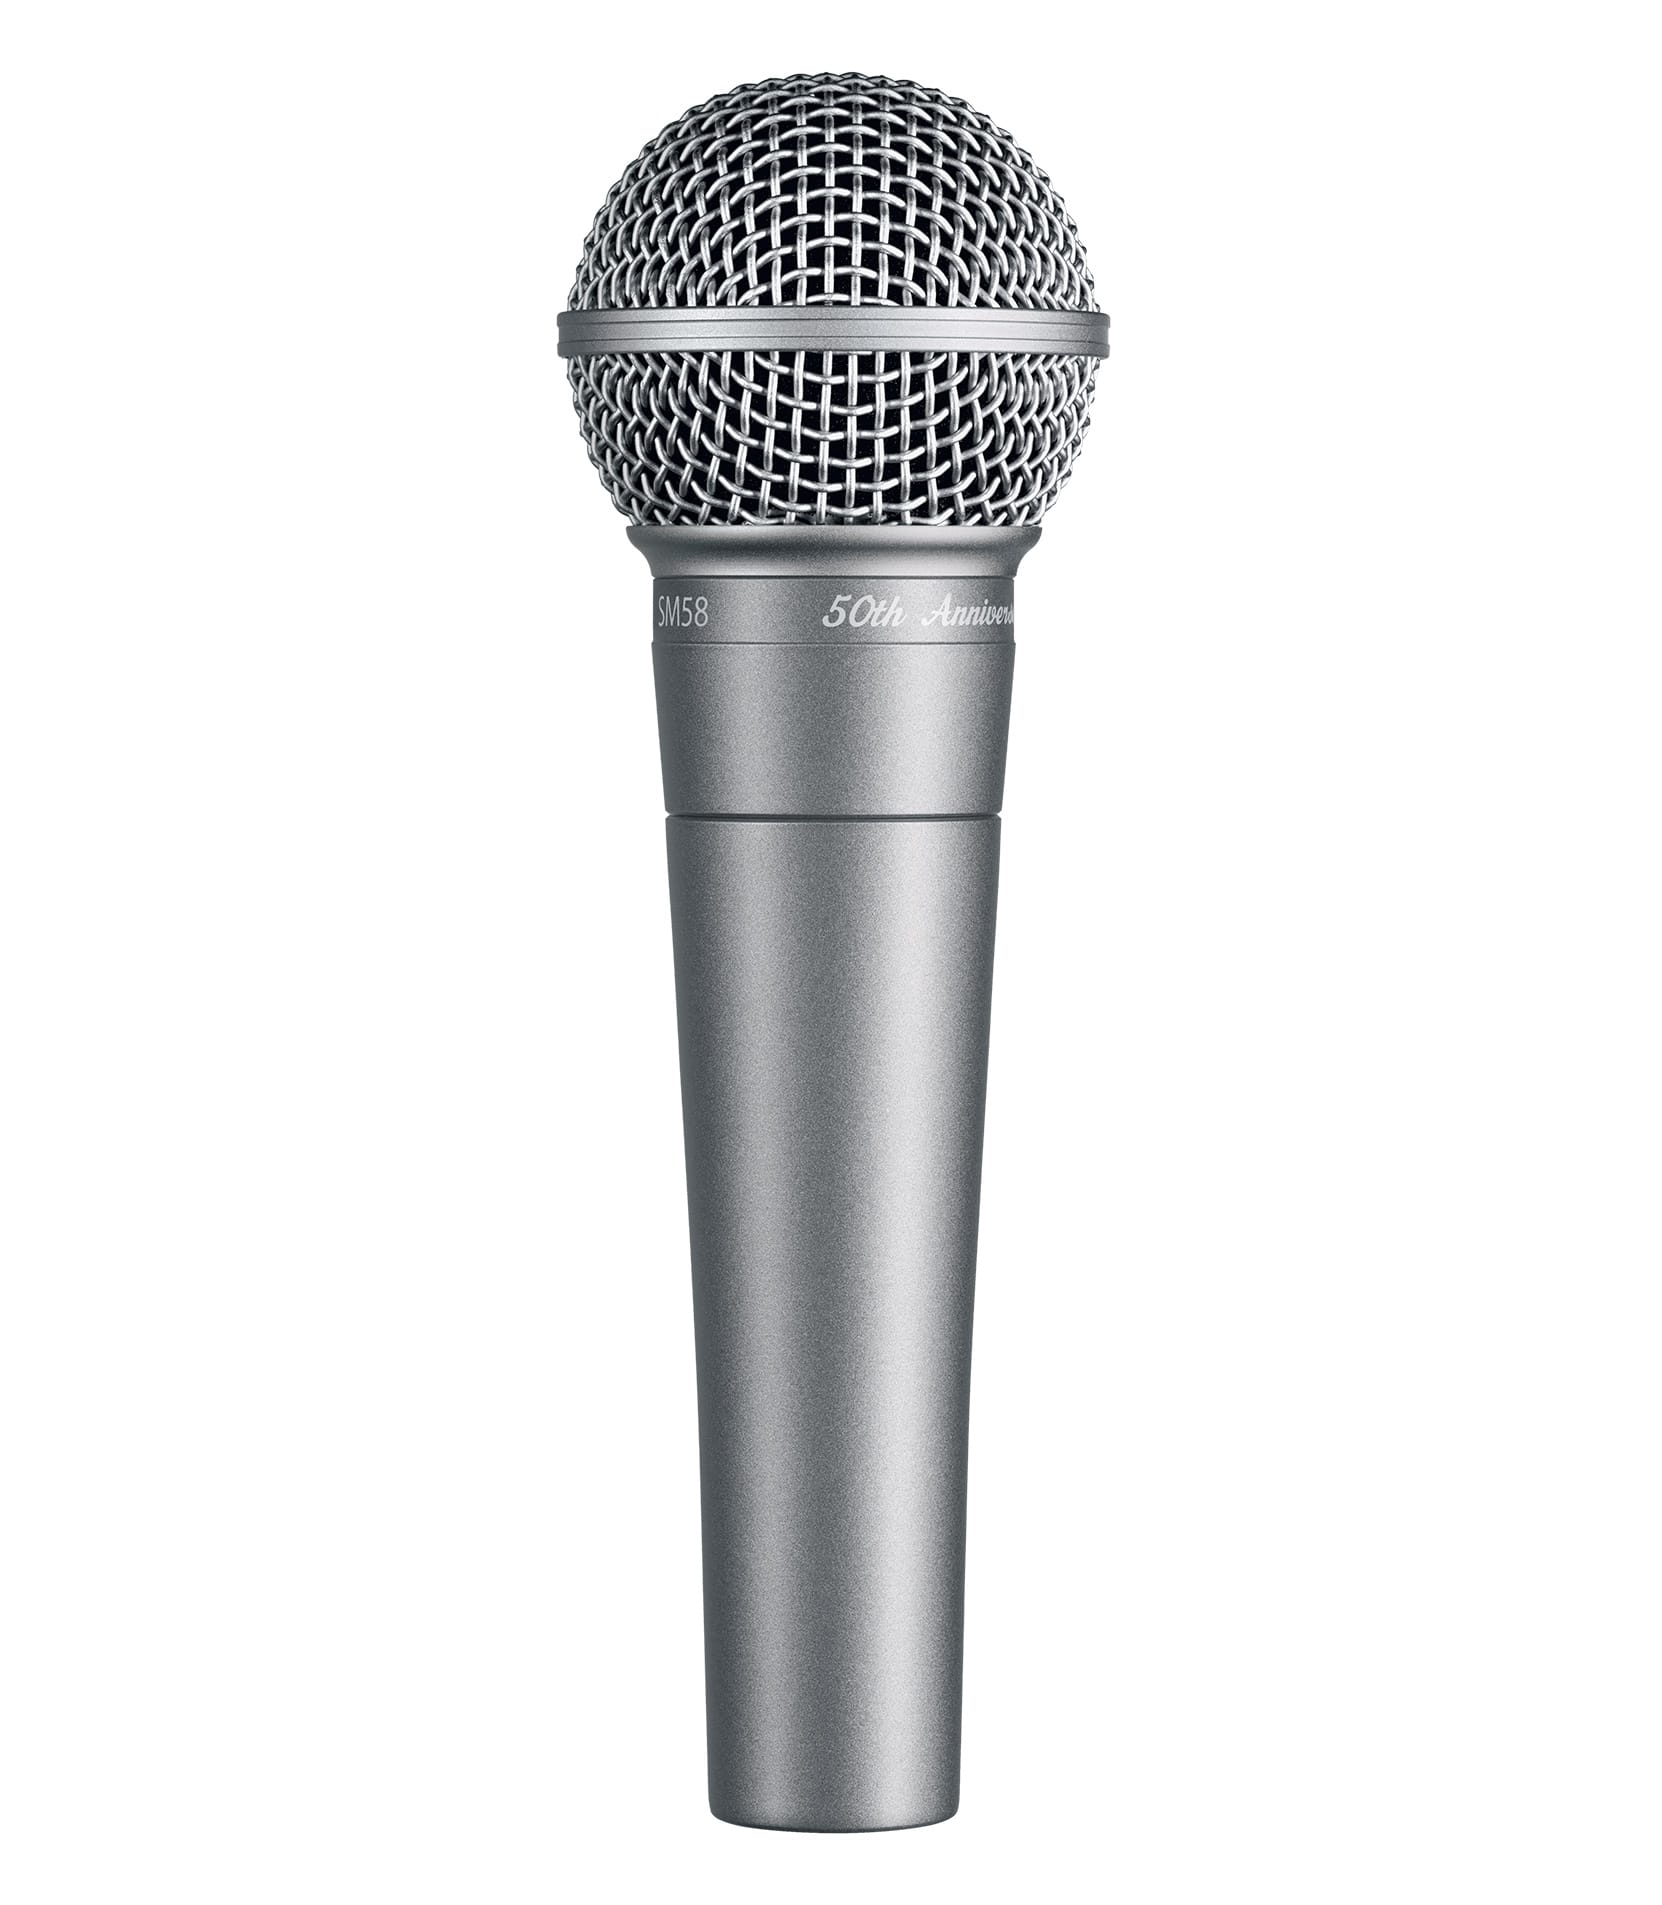 Shure - SM58 50A 50th Anniversary Edition Vocal Microphone